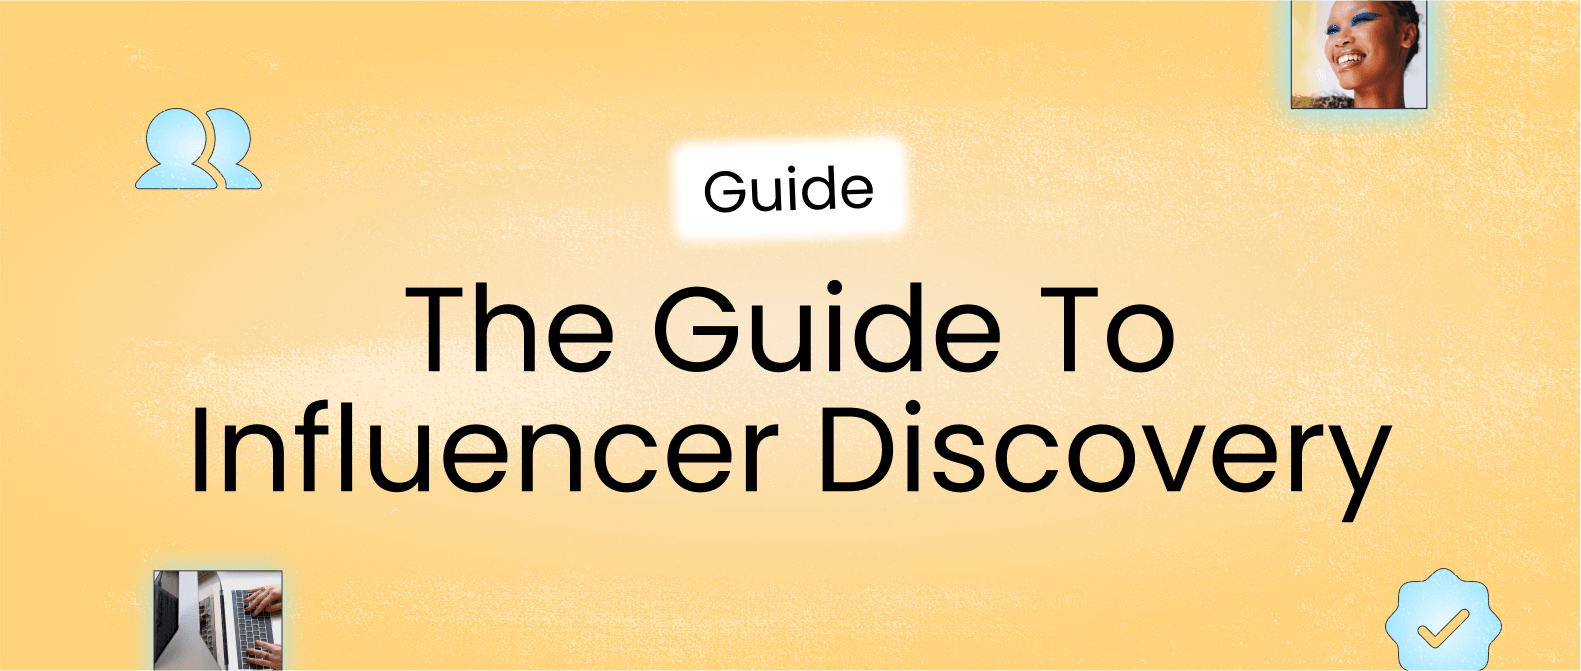 Free influencer discovery guide for brand marketers